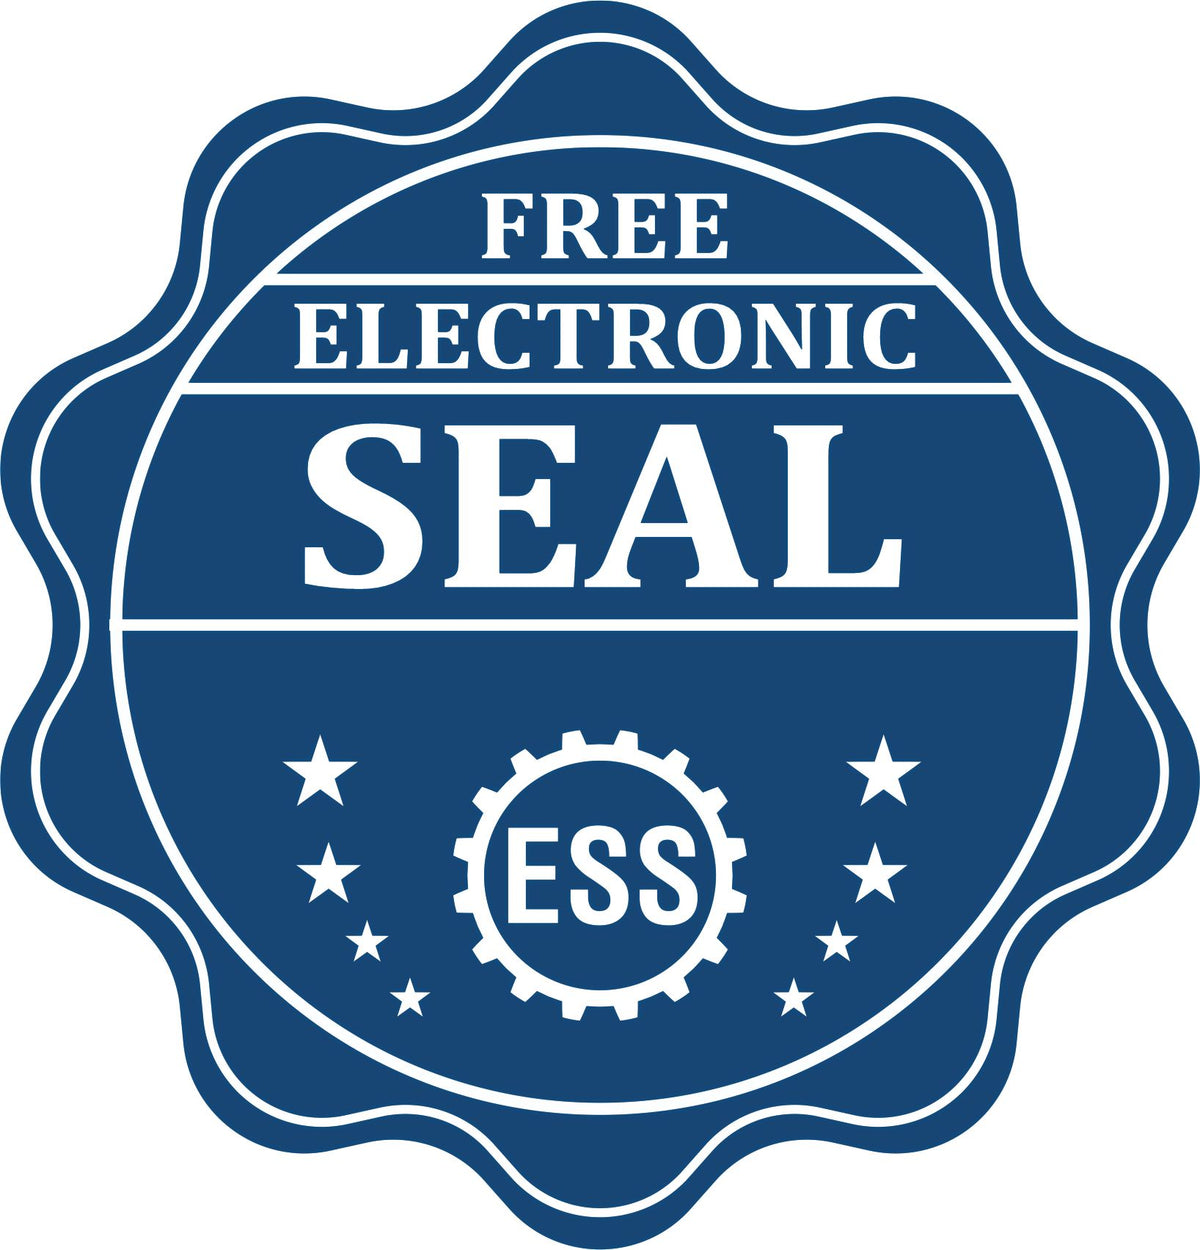 A badge showing a free electronic seal for the Heavy Duty Cast Iron Hawaii Architect Embosser with stars and the ESS gear on the emblem.